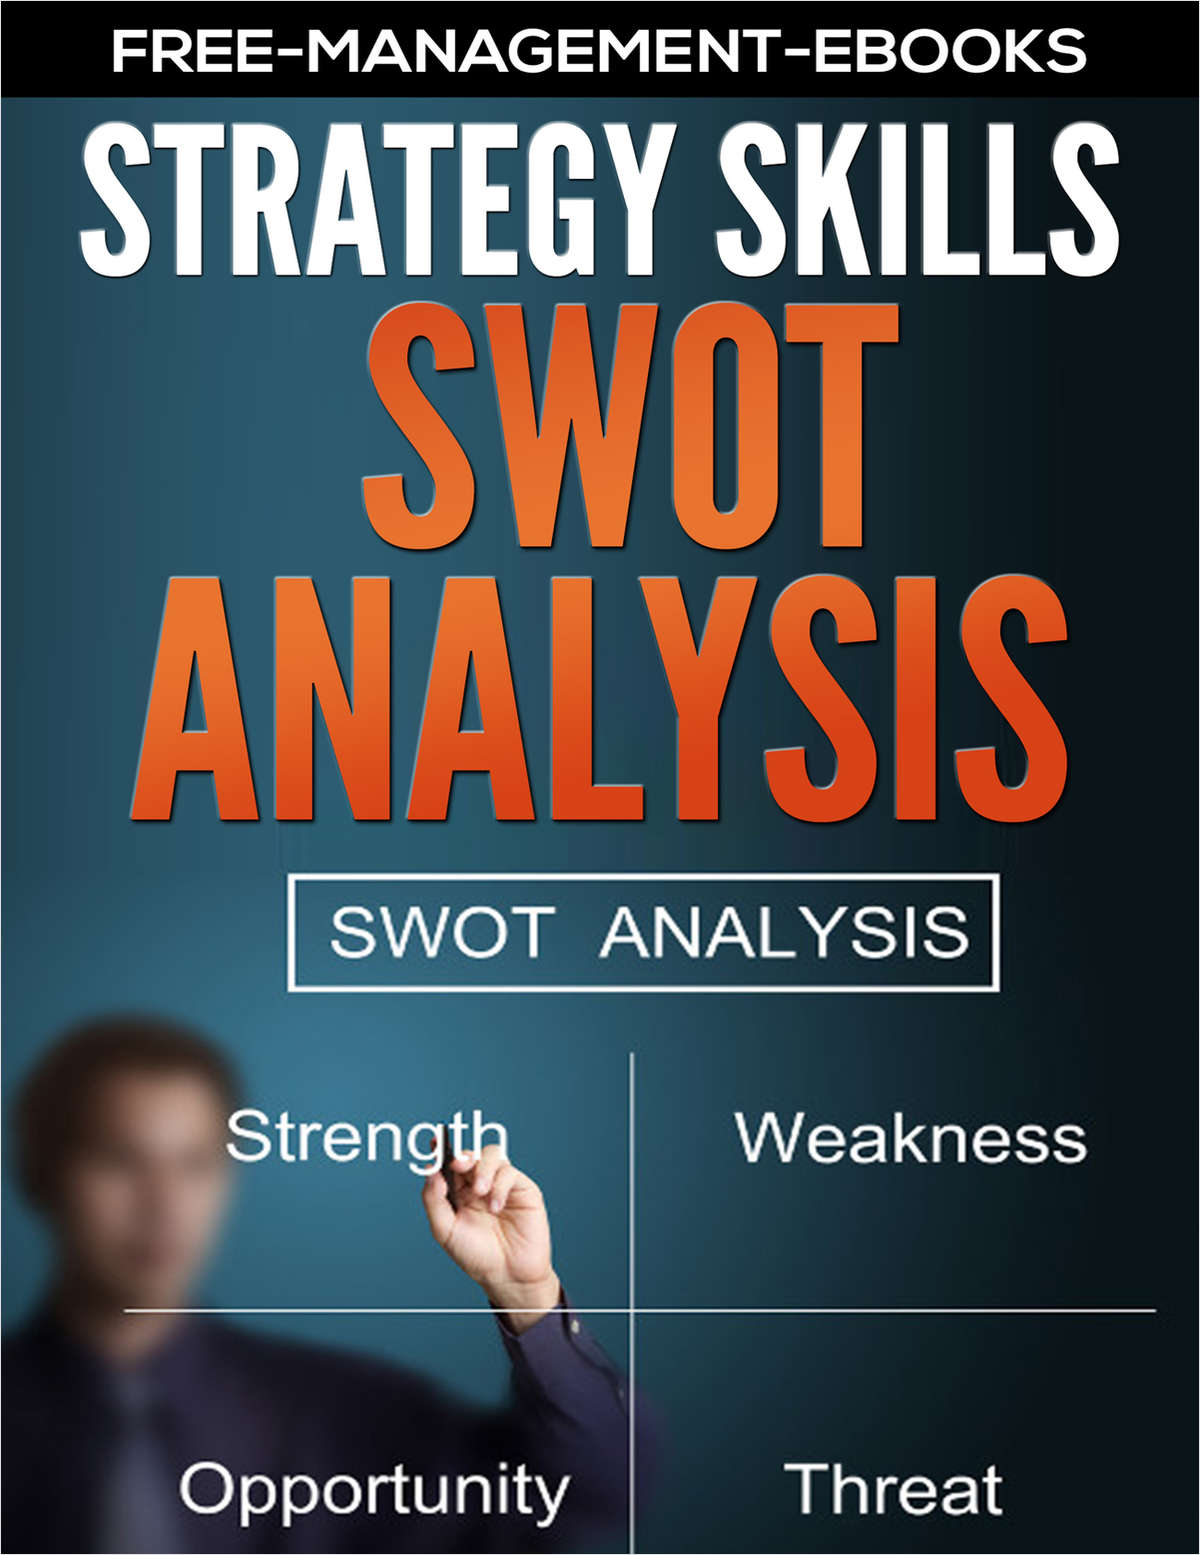 SWOT Analysis -- Developing Your Strategy Skills